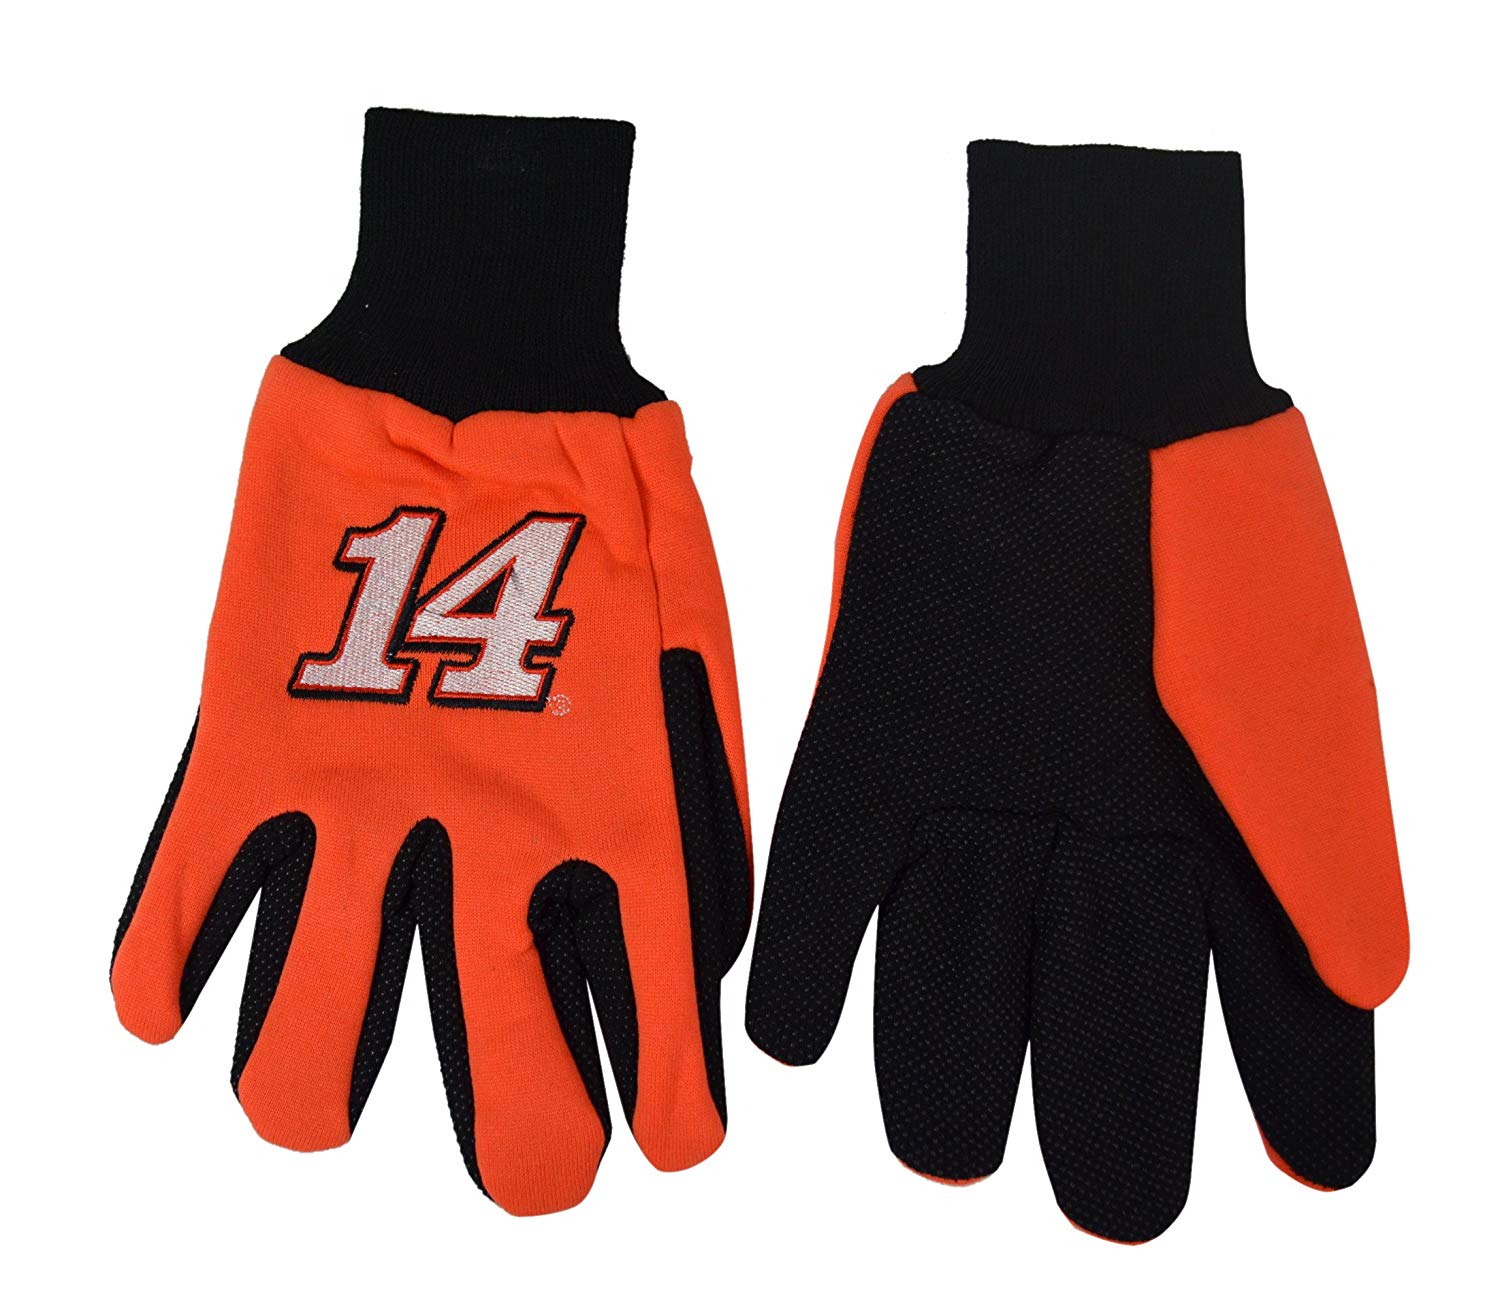 Official NASCAR Fan Shop Authentic Utility Work Glove and Matching Polycarbonate Sunglass Set. Show Pride for your favorite NASCAR driver